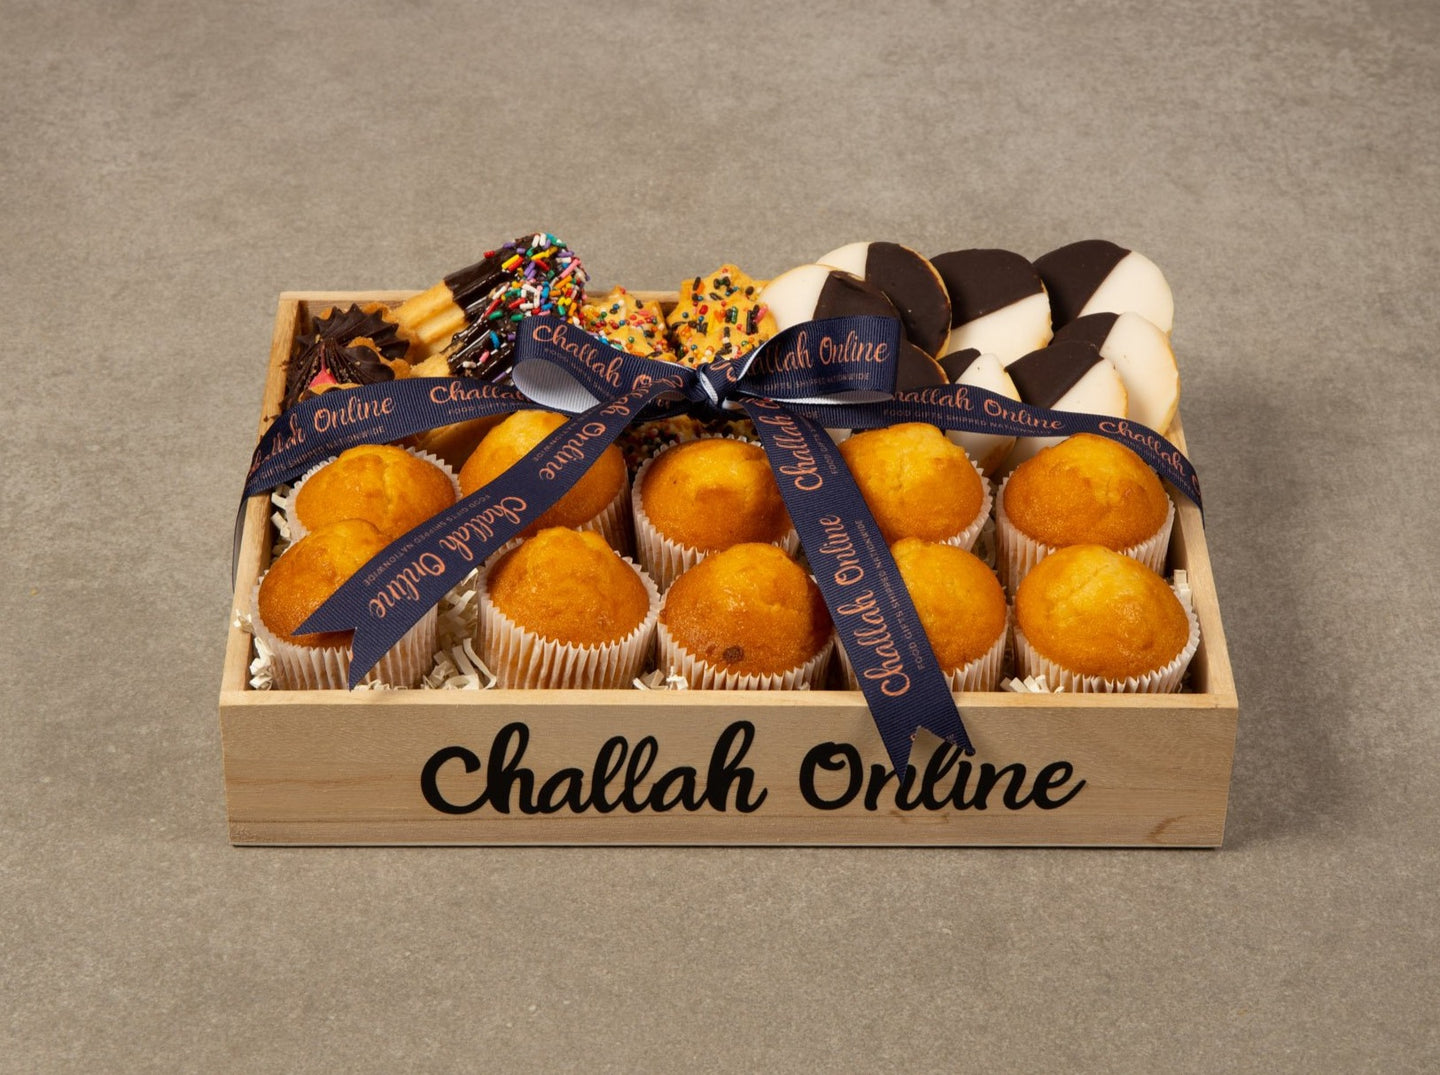 Challah Online Gift Box filled with muffins and other assorted bakery items. 